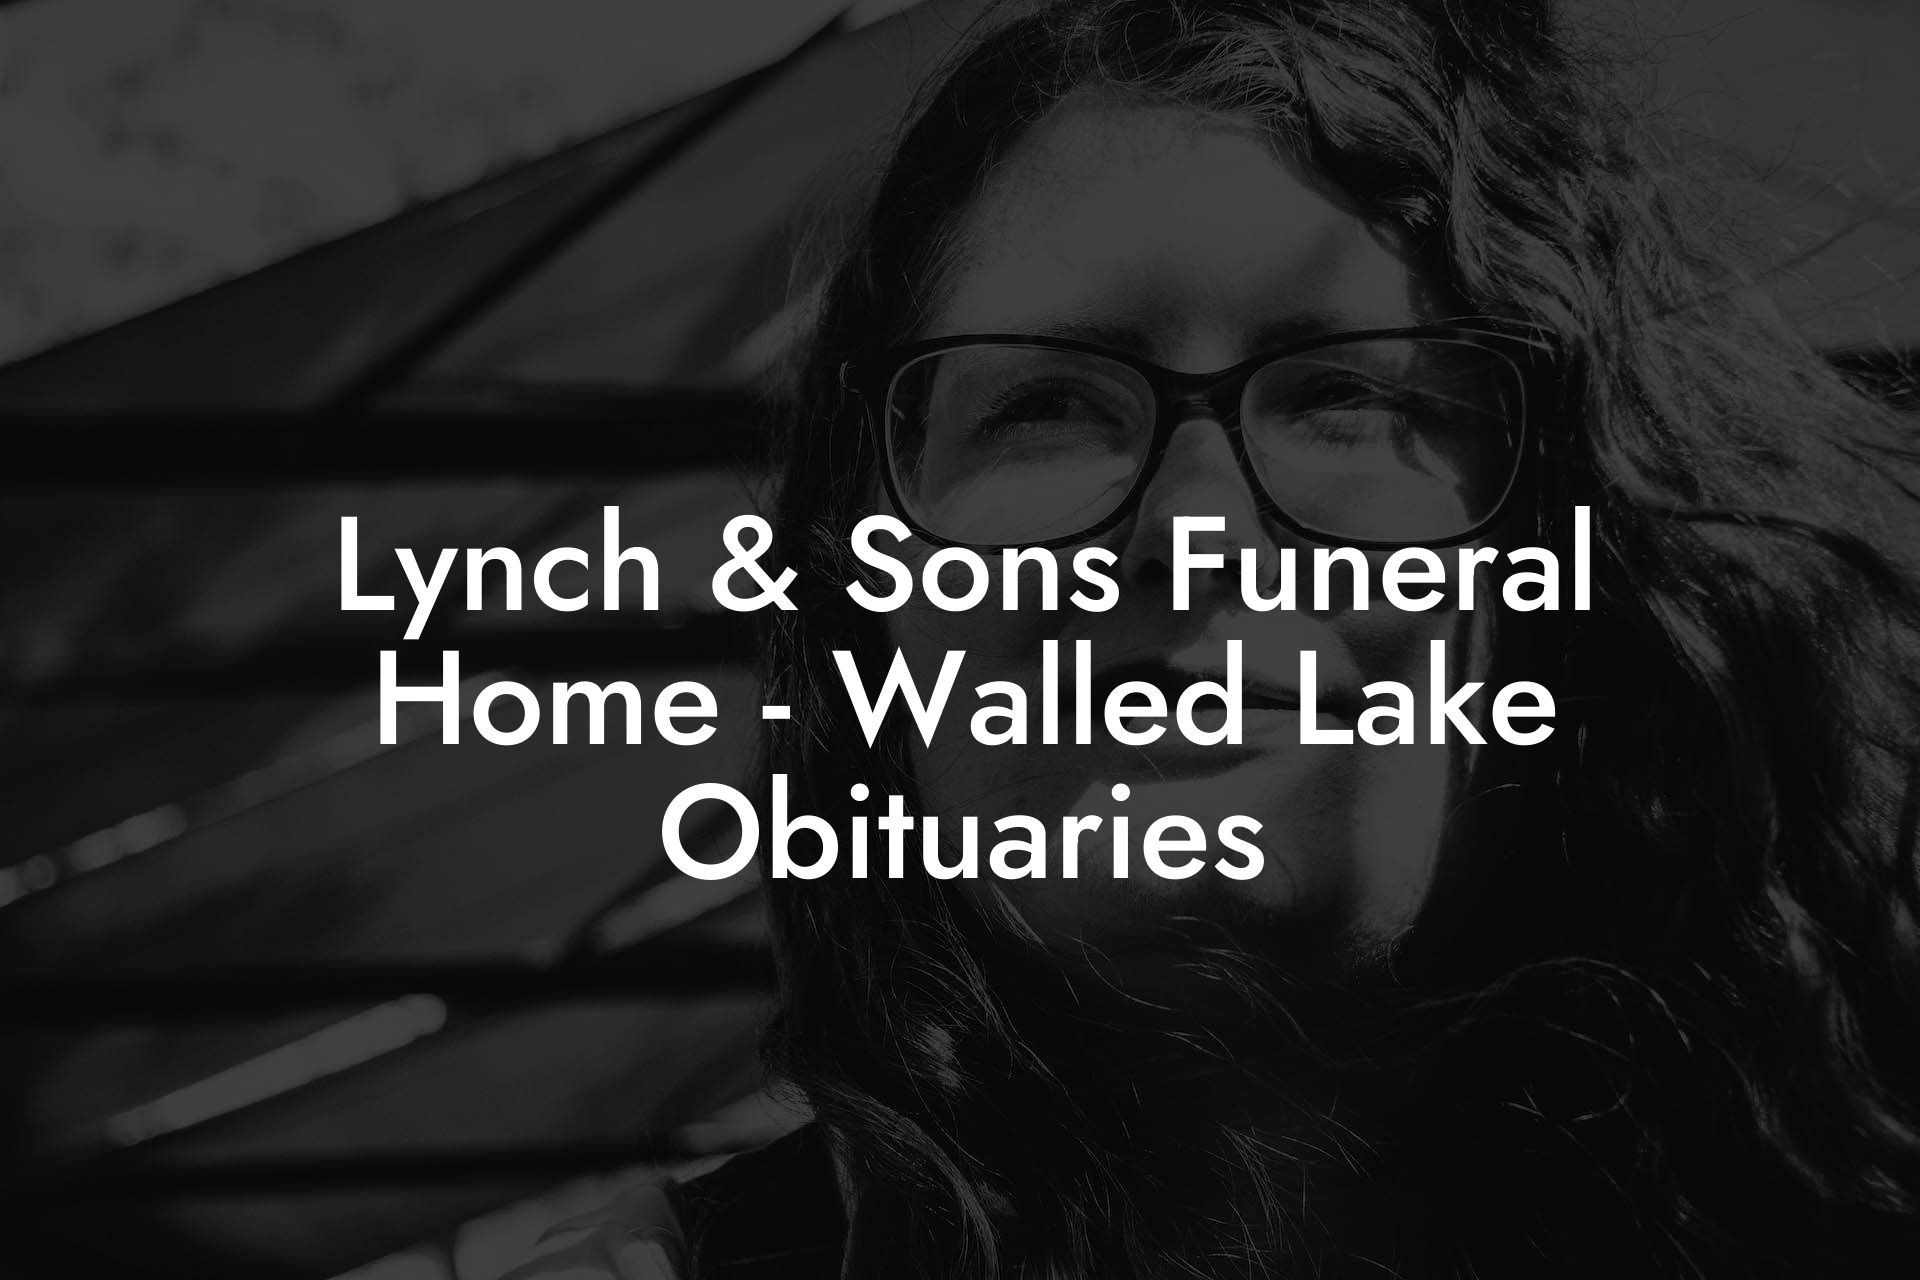 Lynch & Sons Funeral Home - Walled Lake Obituaries